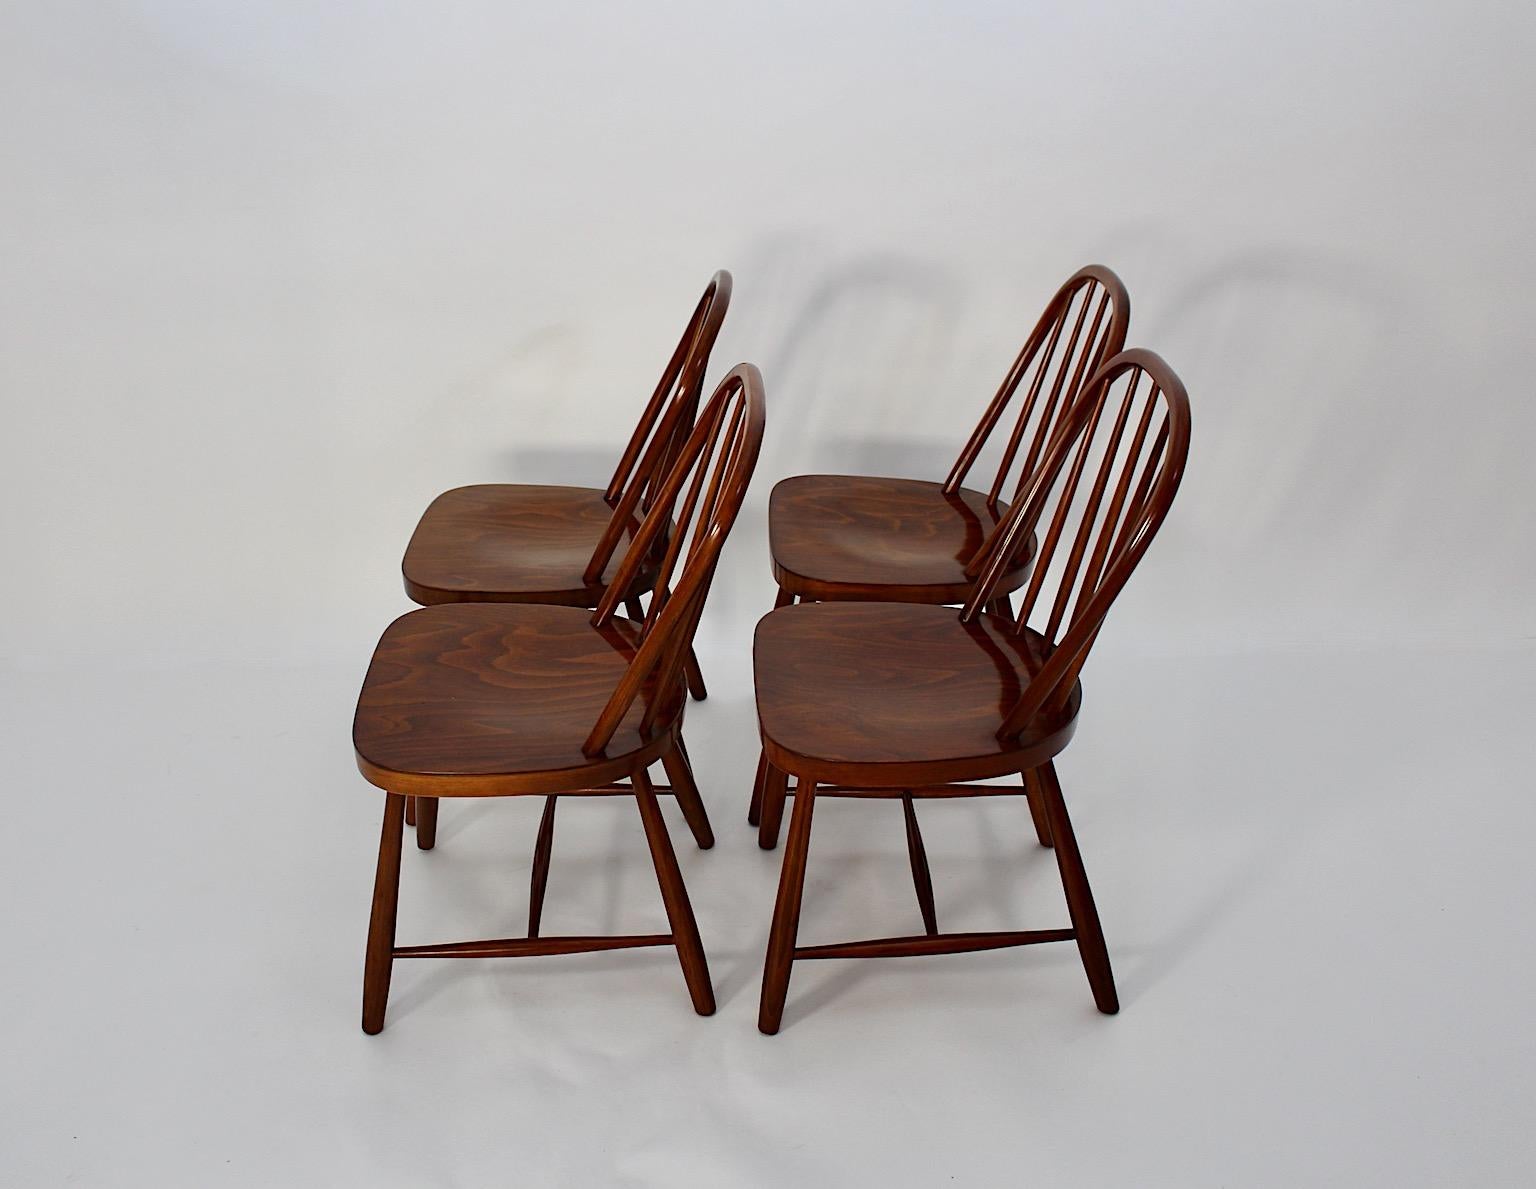 Early 20th Century Art Deco Vintage Beech Windsor Dining Room Chairs Four Josef Frank 1920s Vienna For Sale